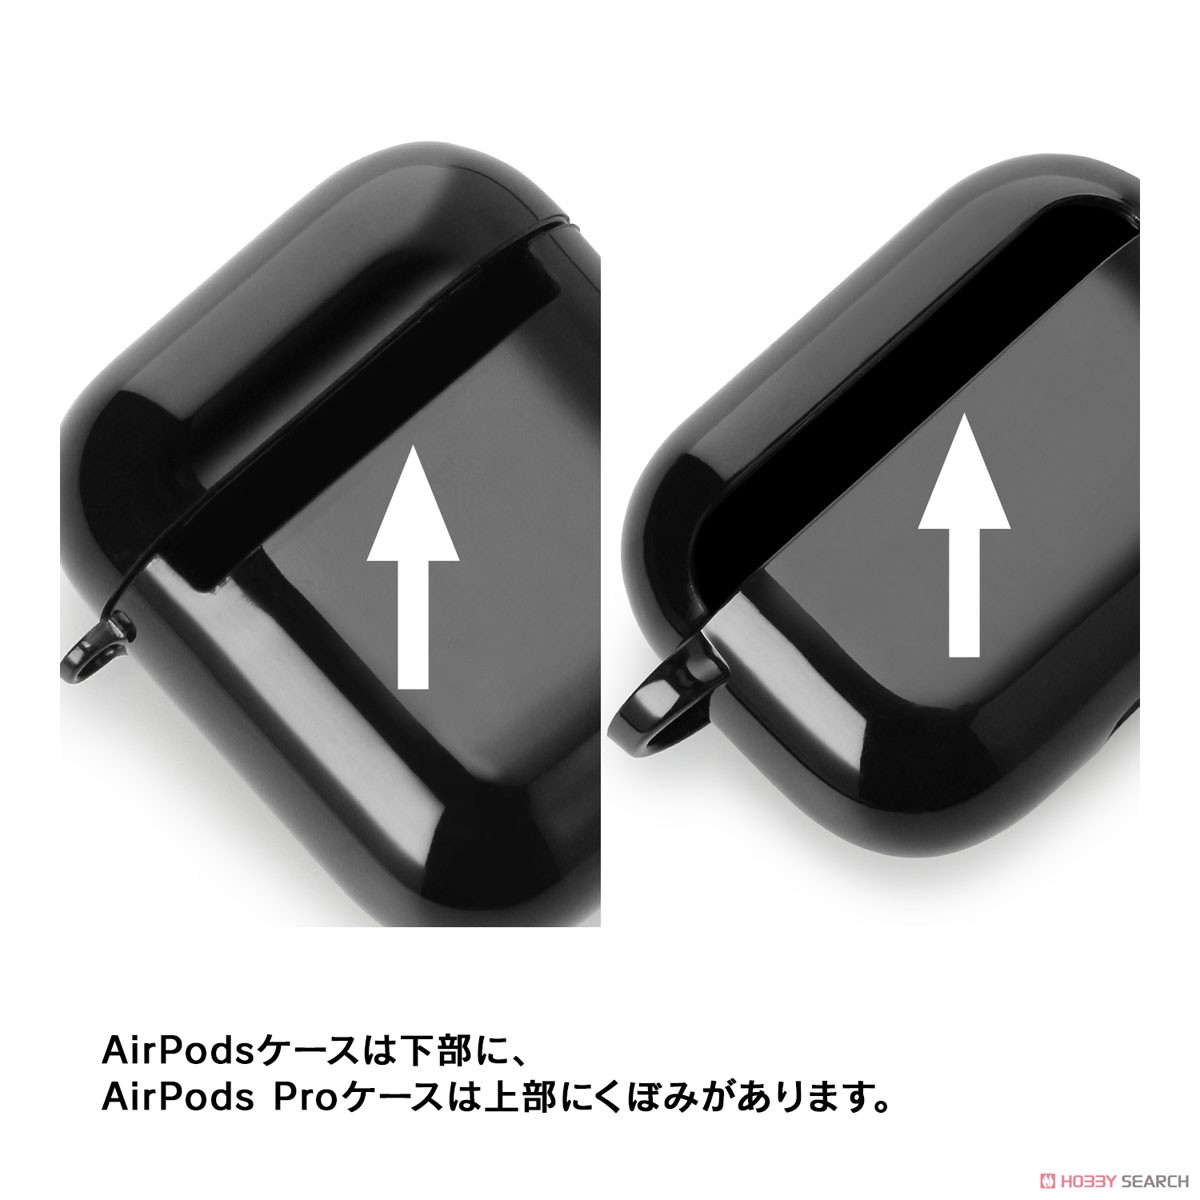 TVアニメ「最遊記RELOAD -ZEROIN-」 玄奘三蔵 AirPodsケース(対応機種/AirPods) (キャラクターグッズ) その他の画像4